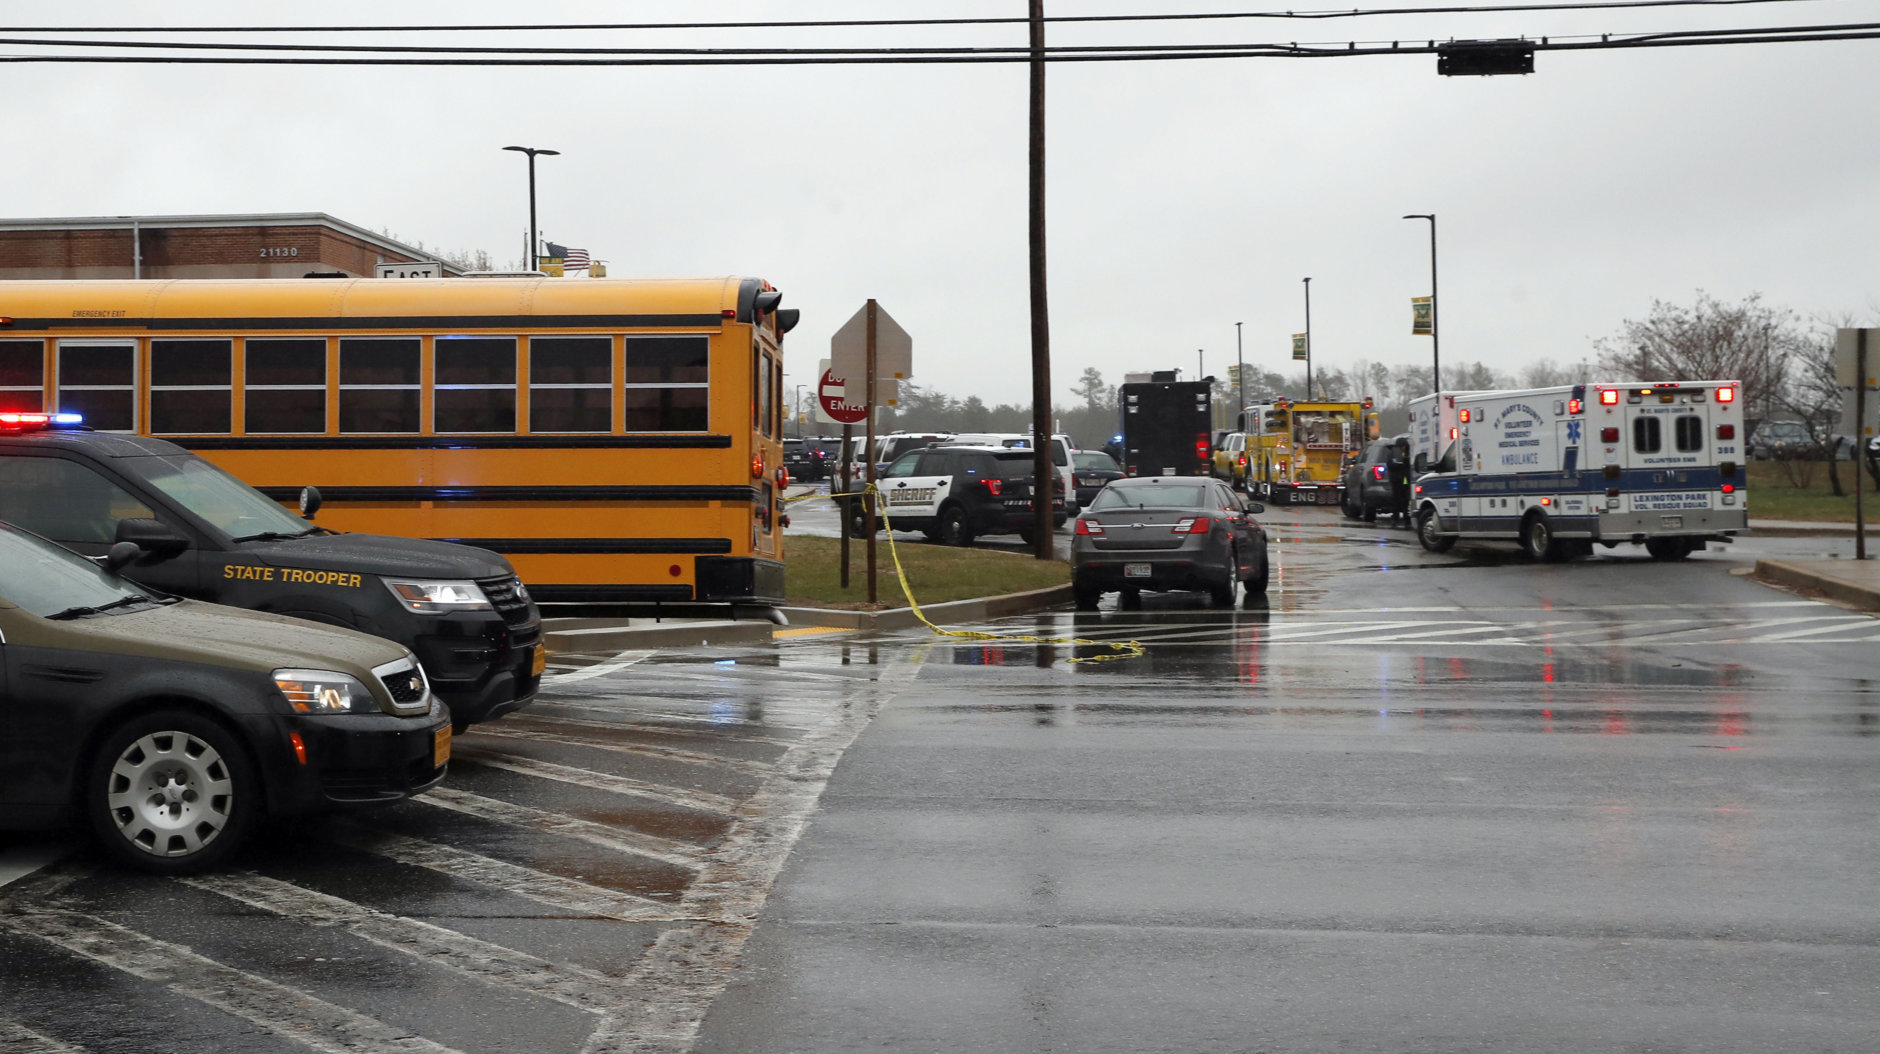 Vehicles of first responders and school buses are parked at the entrance to Great Mills High School Tuesday, March 20, 2018, in Great Mills. A student with a handgun shot two classmates inside the high school before he was fatally wounded during a confrontation with a school resource officer, a sheriff said. (AP Photo/Alex Brandon)